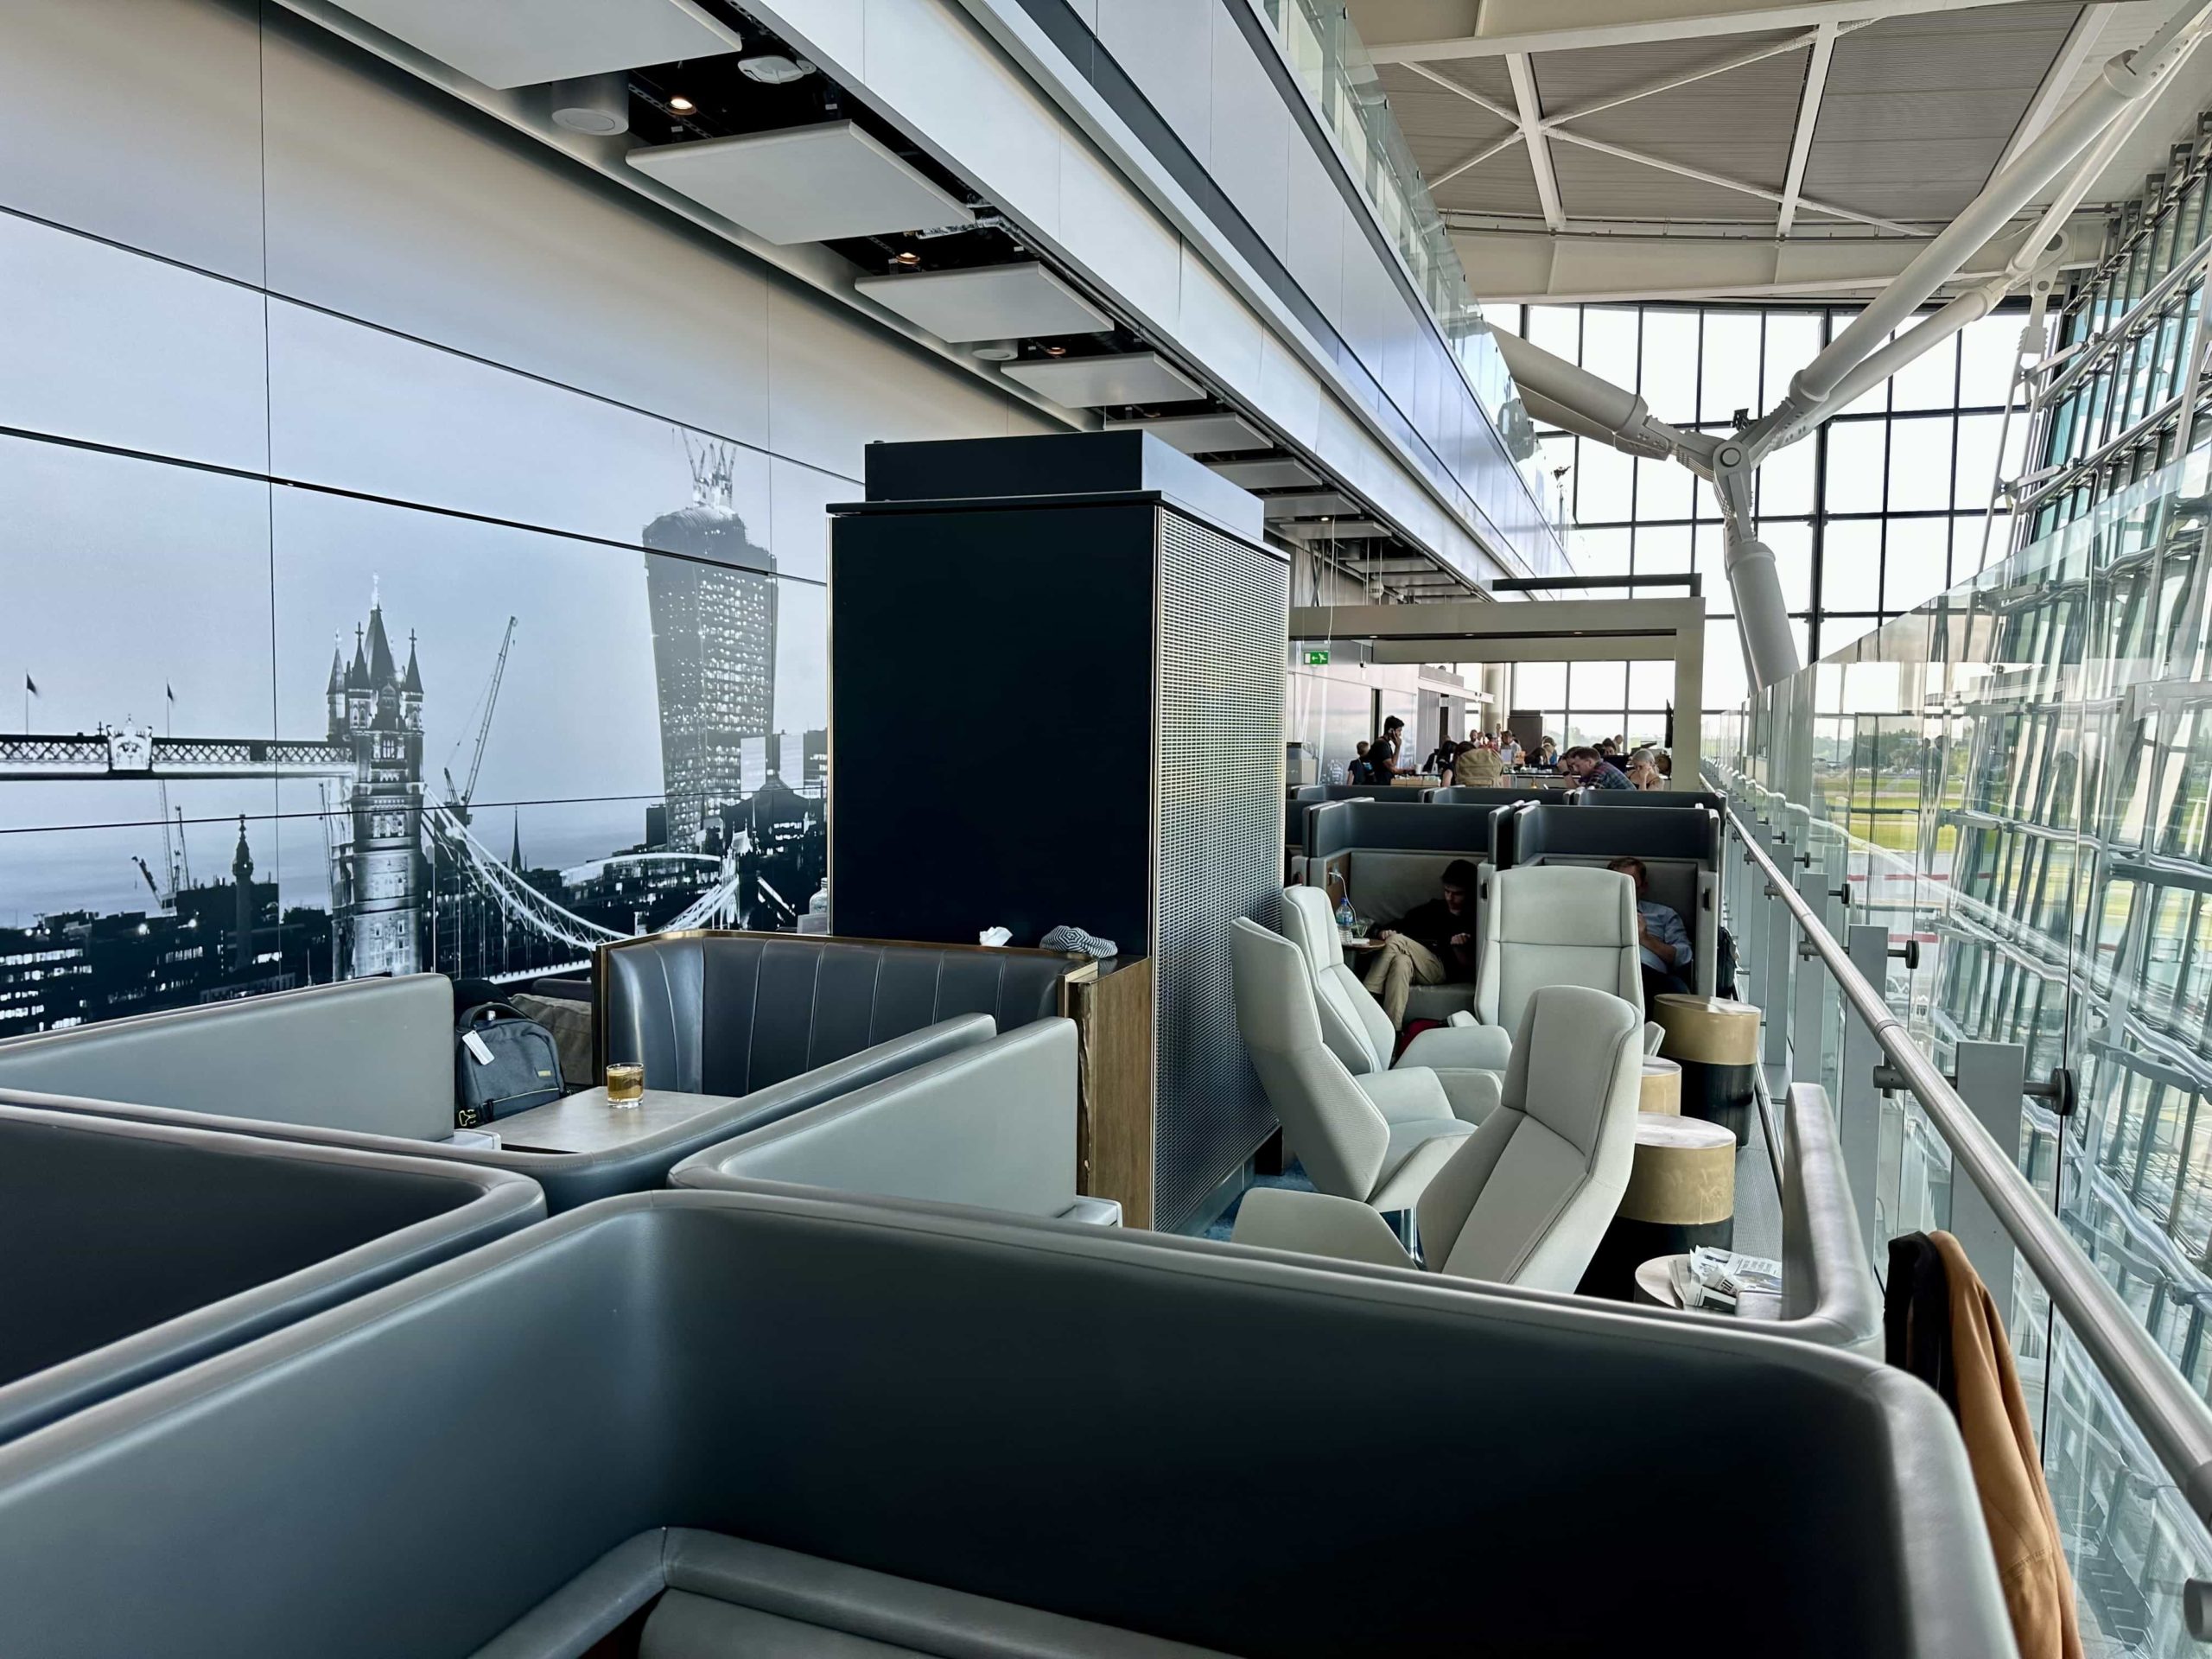 A long, narrow, open-air section of an airport lounge with a mixture of booth seating and armchairs